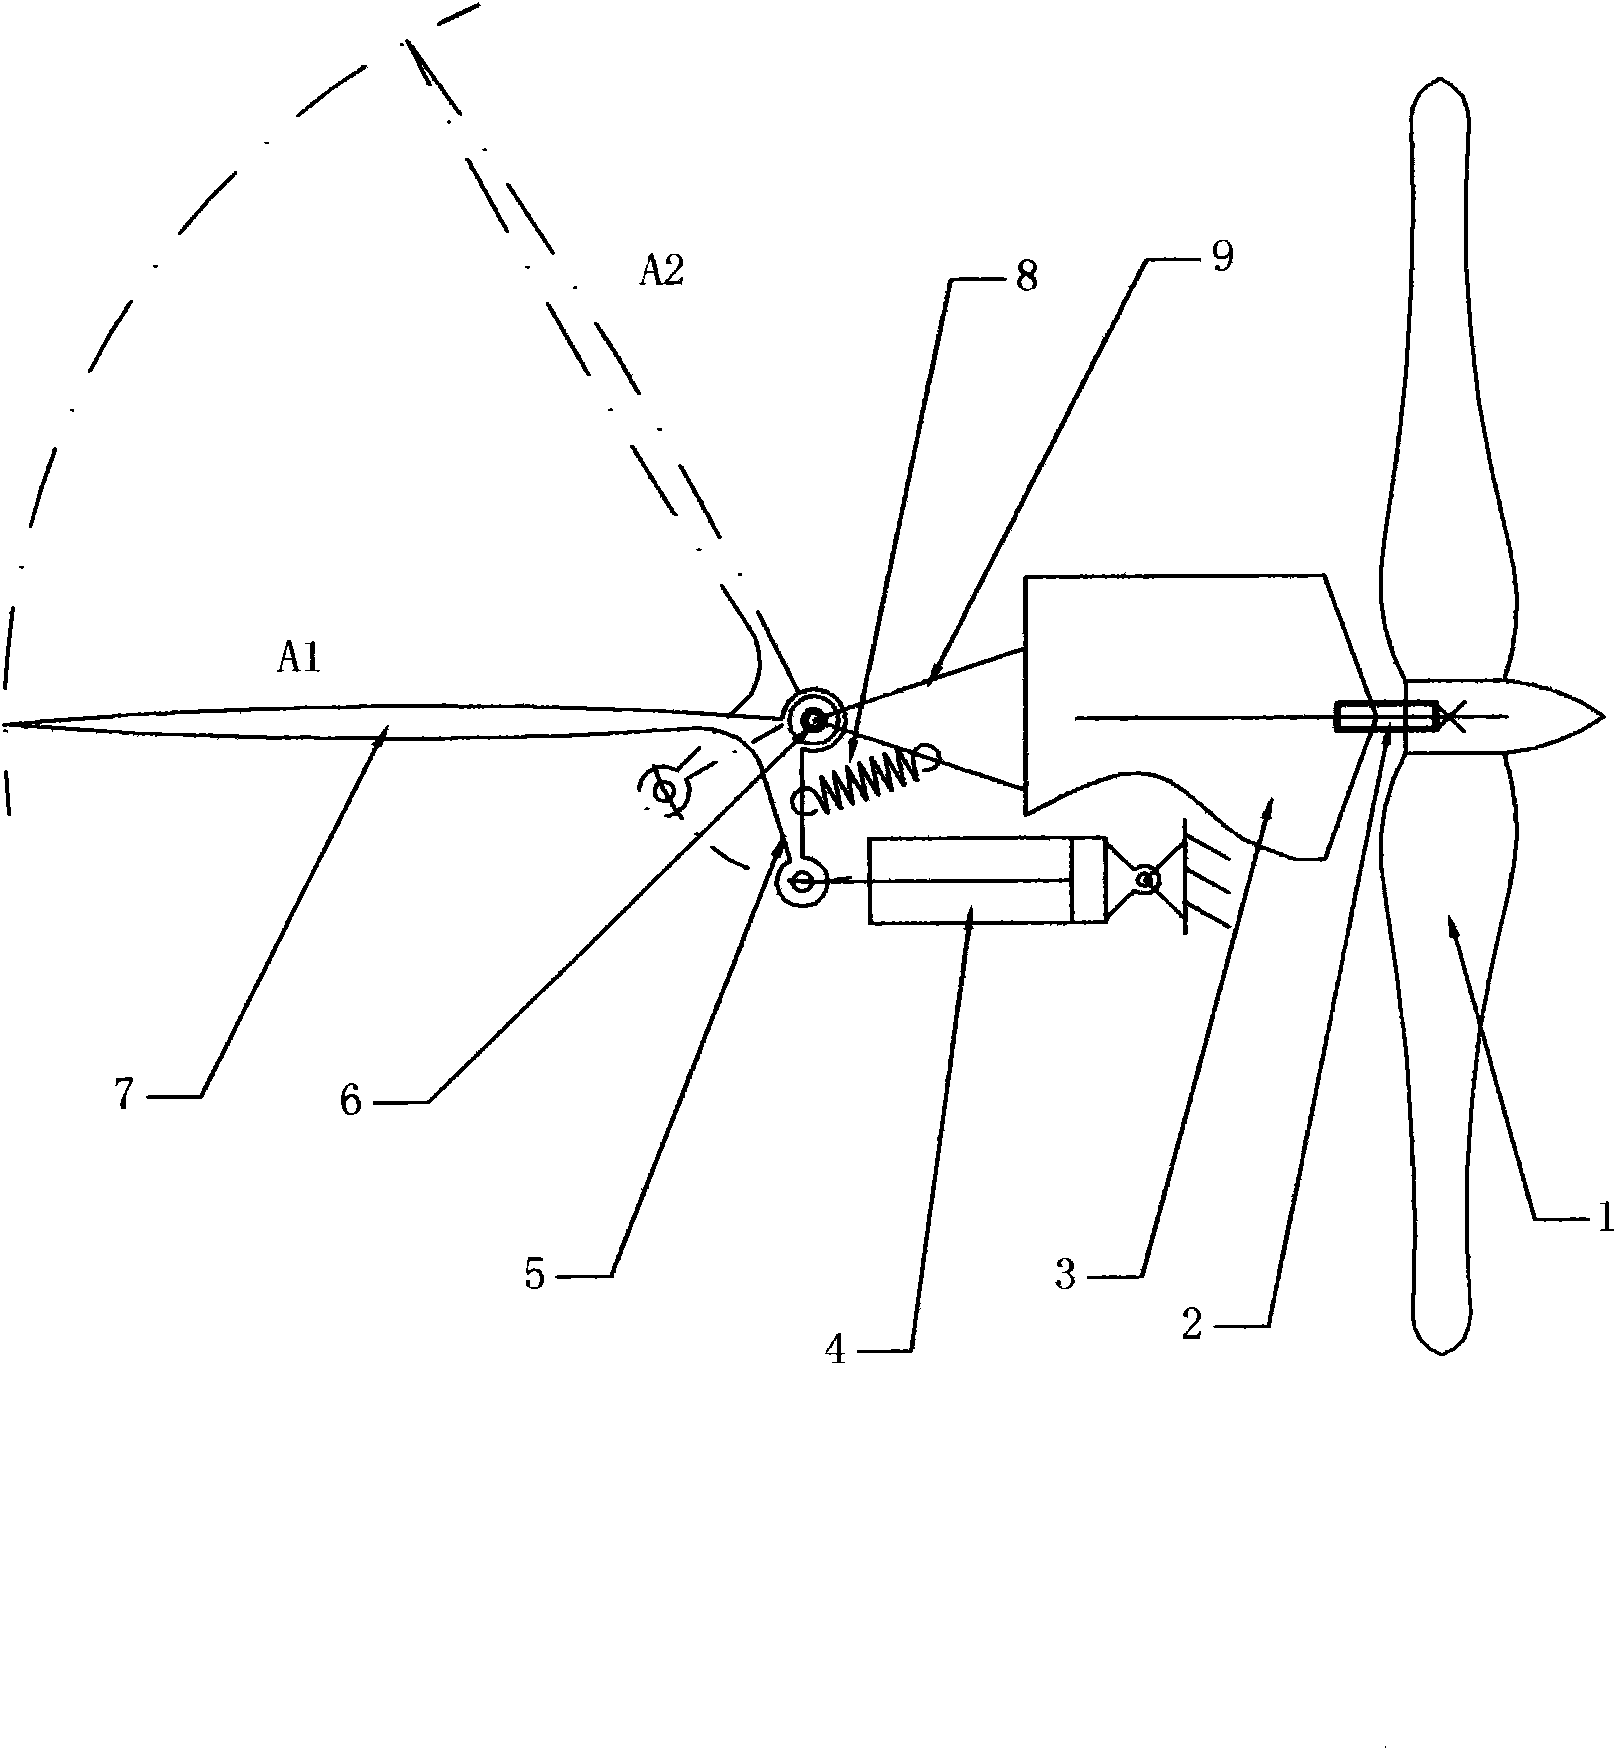 Wind turbine with air cylinder capable of pushing tail rudder automatically